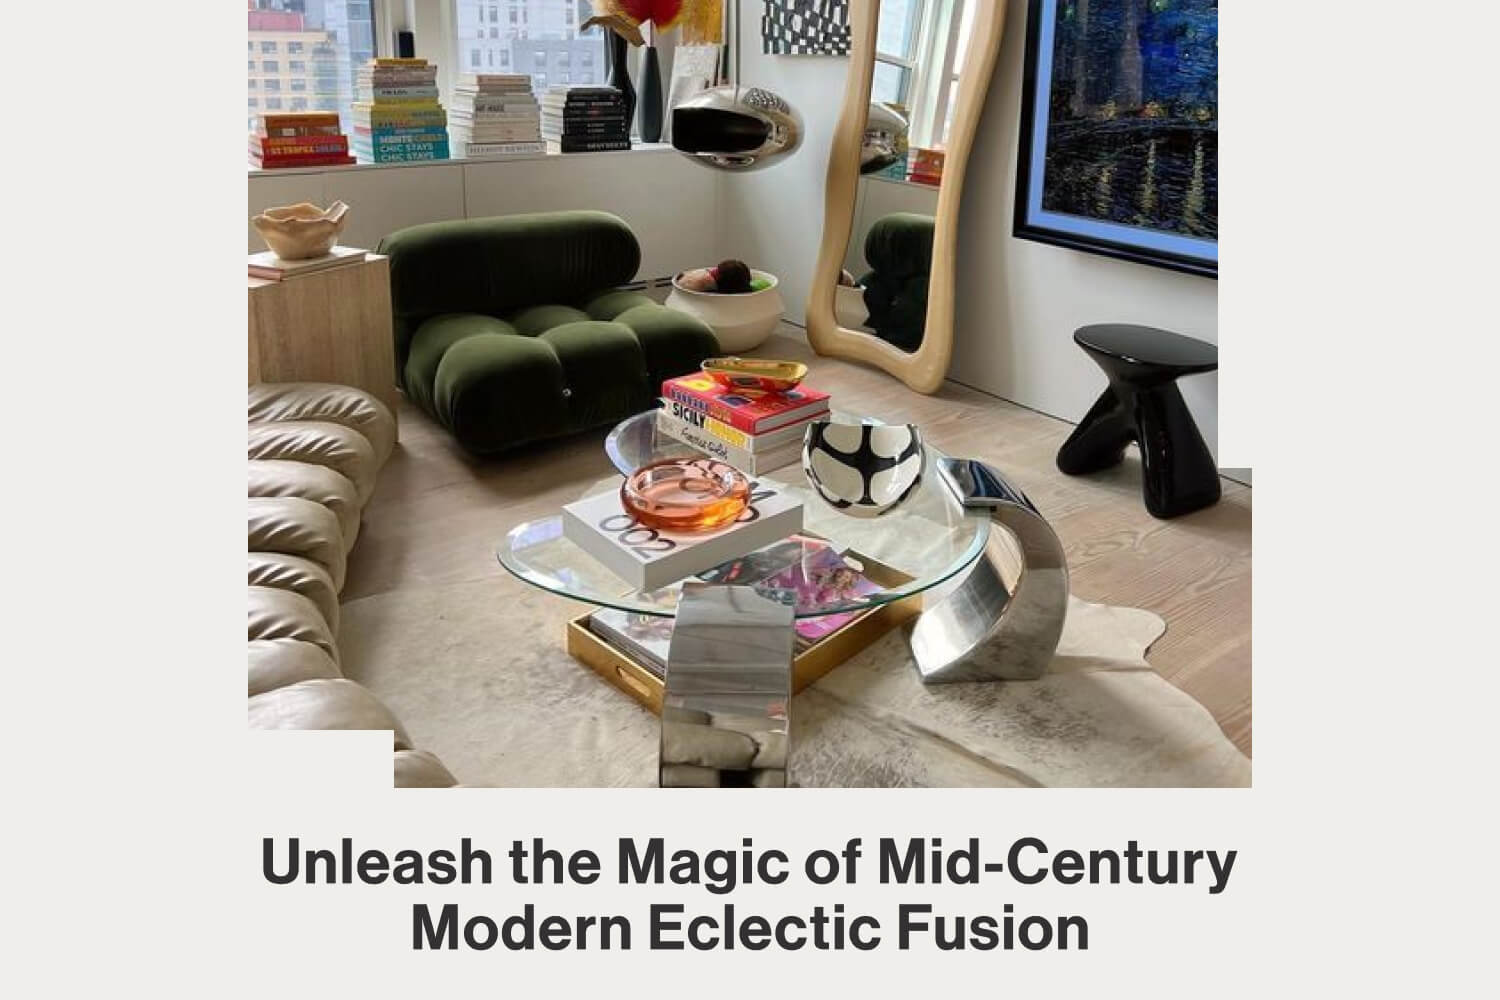 The Art of Achieving Eclectic Harmony With Mid-Century Modern